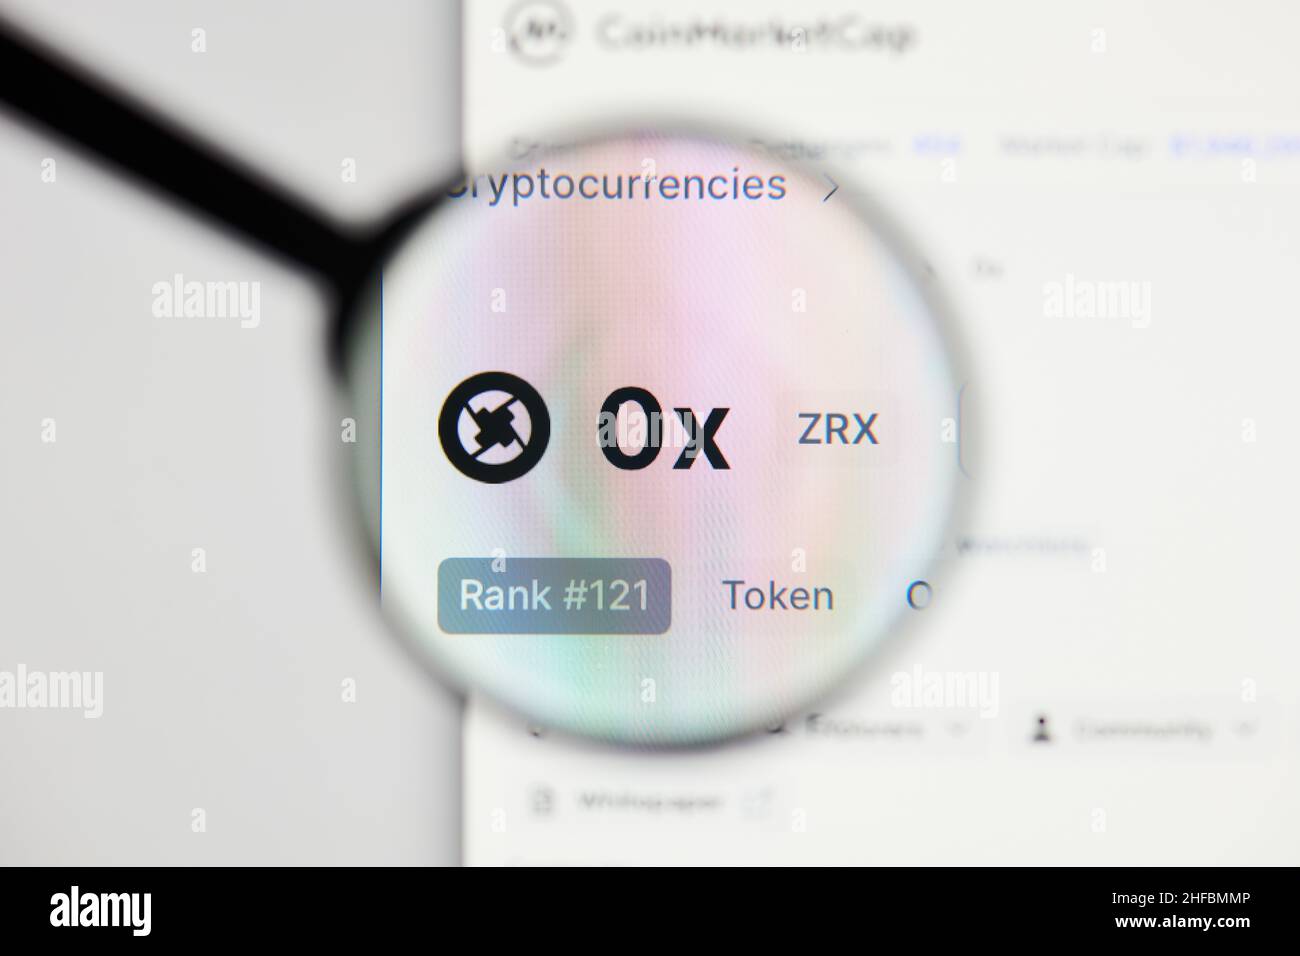 Milan, Italy - January 11, 2022: 0x - ZRX website's hp.  0x, ZRX coin logo visible through a loope. Defi, ntf, cryptocurrency concepts illustrative ed Stock Photo